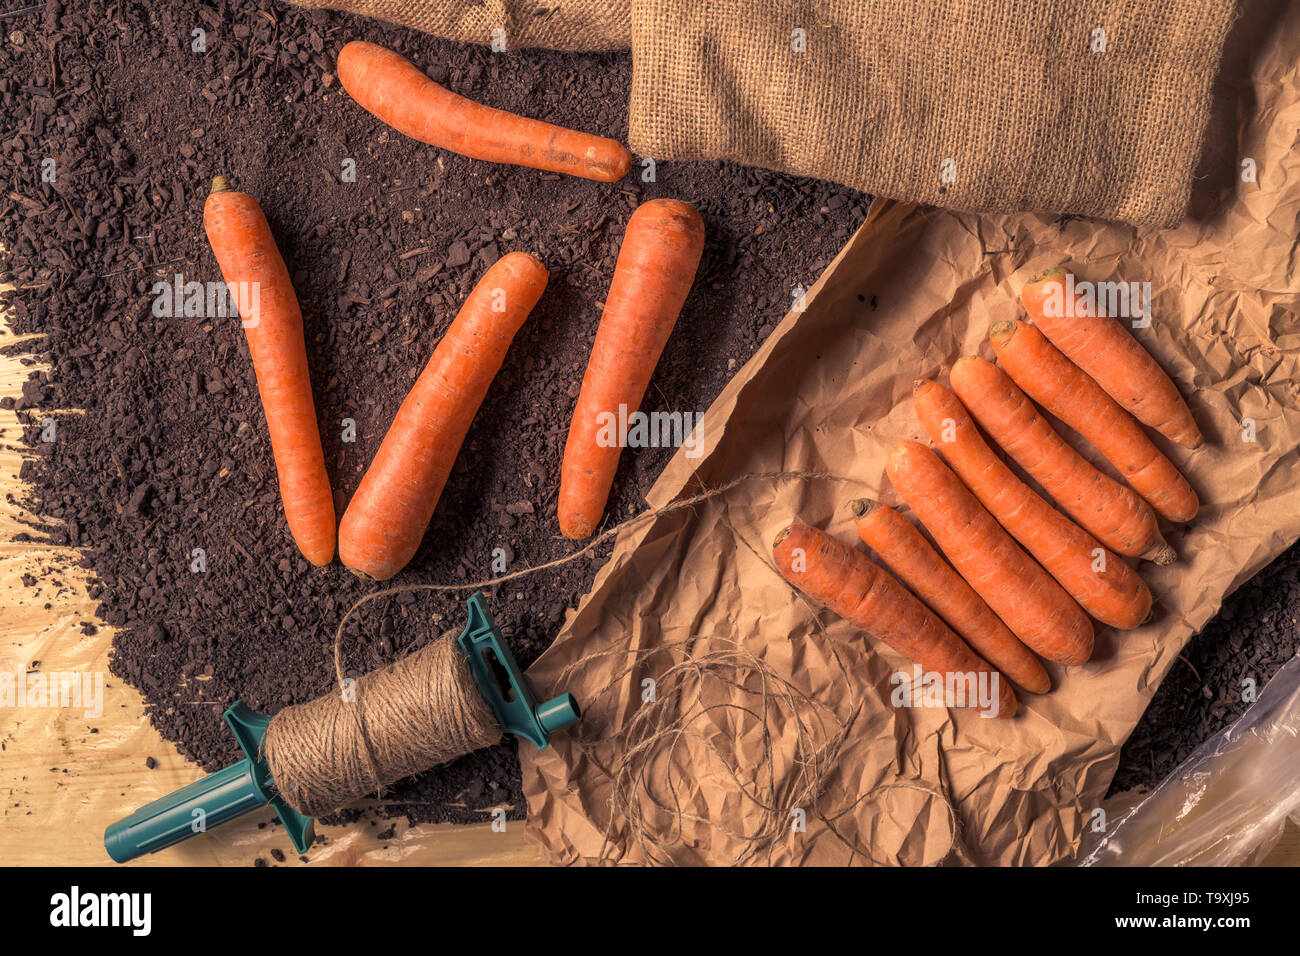 Organic homegrown carrots packing for farmer's market, top view of harvested root vegetable Stock Photo